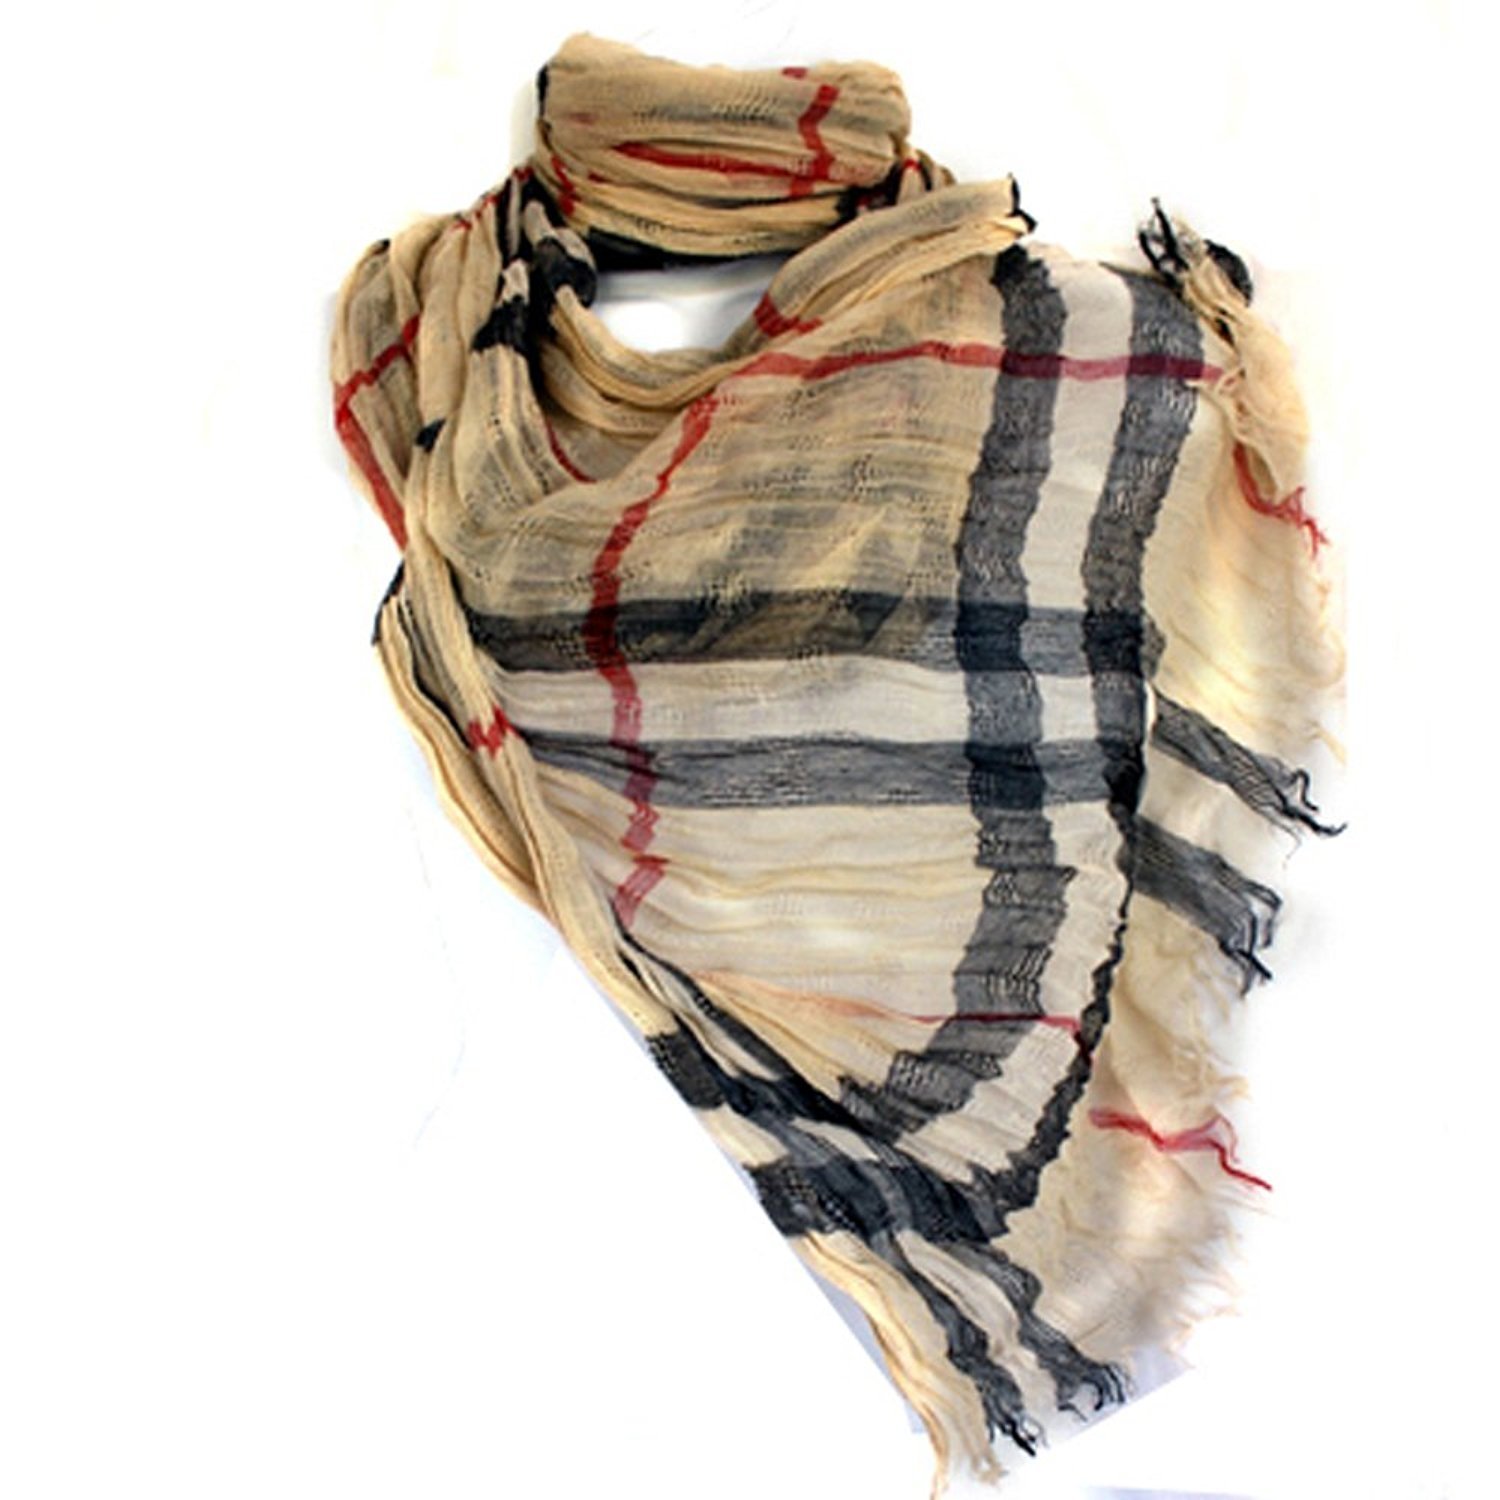 SILVERFEVER Soft Cashmere Feel Plaid Scarf Tartan Preppy Style Checkered Elegant Scarves for Women's Men's - image 2 of 6